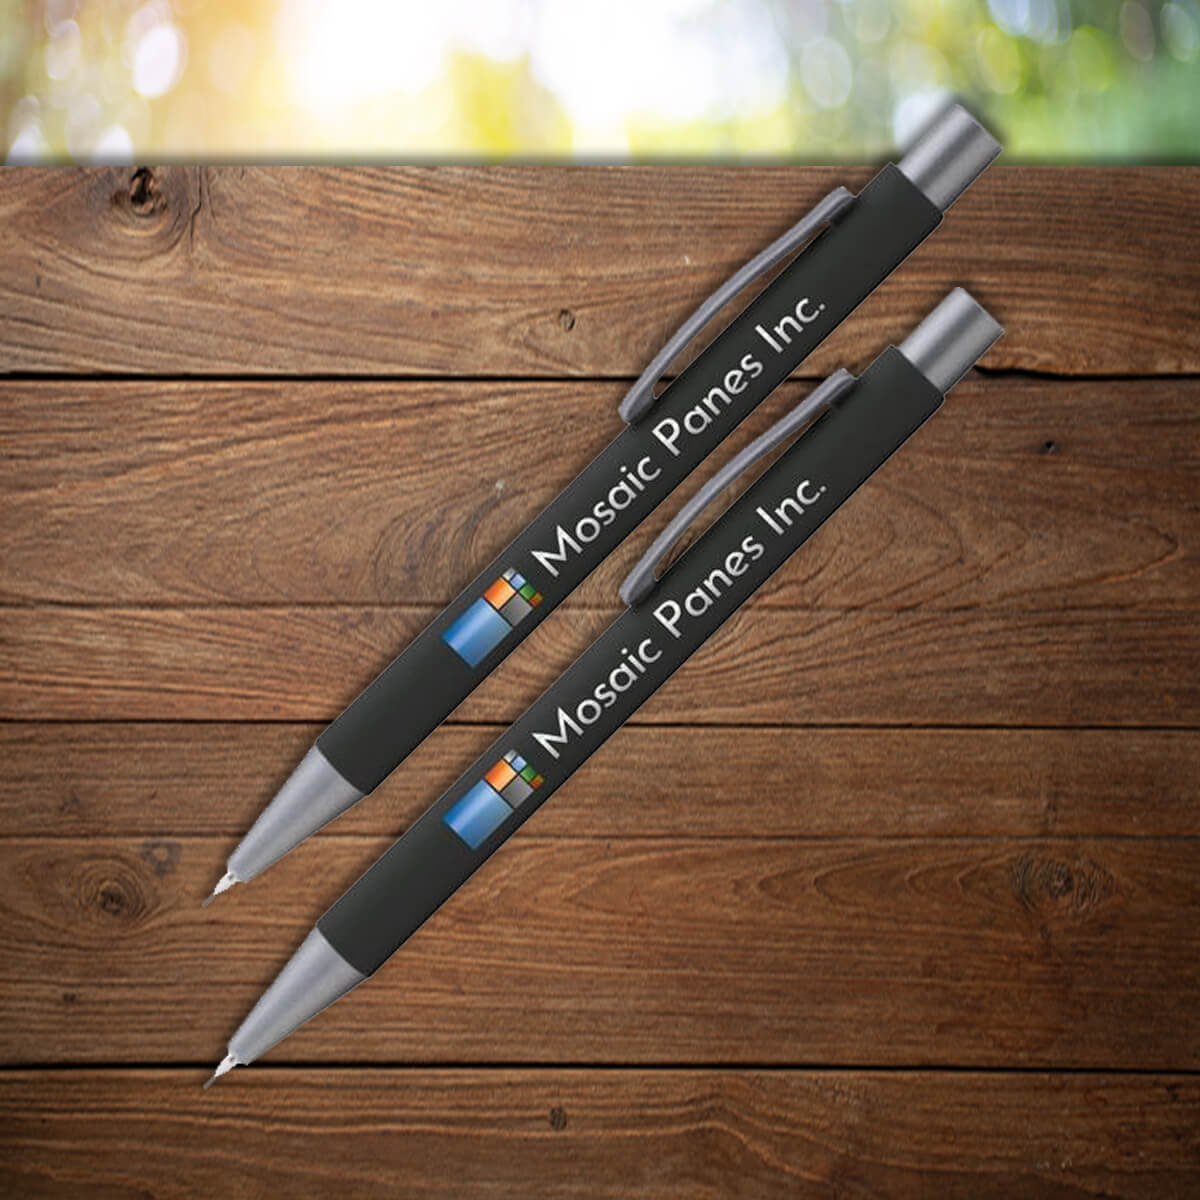 Black mechanical pencil with multi color imprint shown on custom pencils promotional writing implements by curative printing